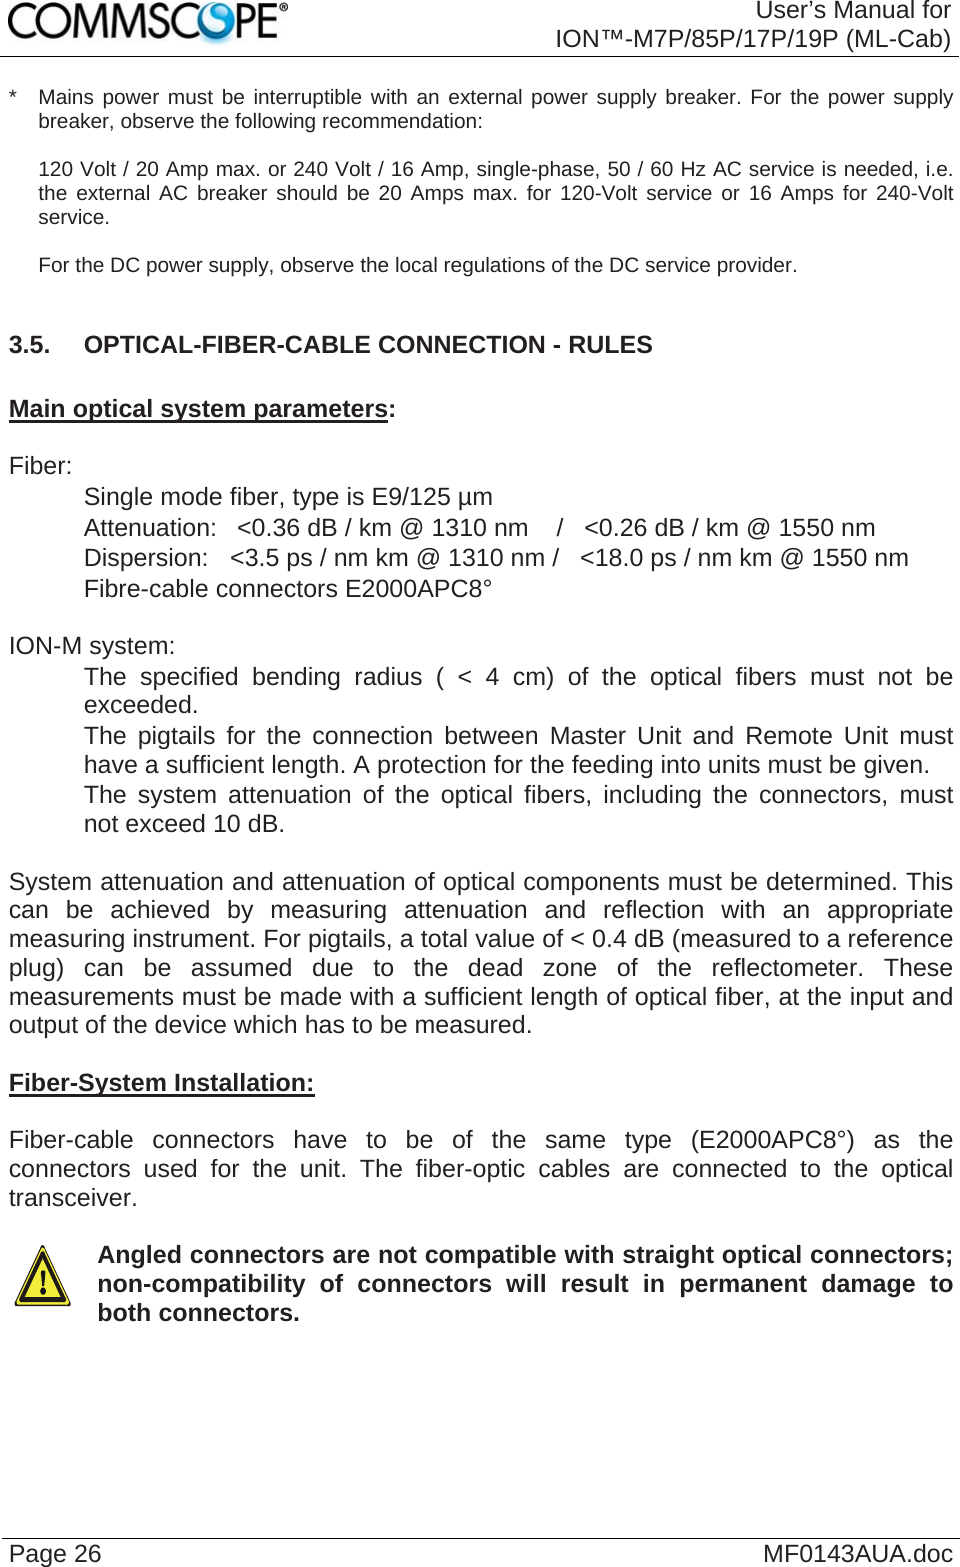  User’s Manual for ION™-M7P/85P/17P/19P (ML-Cab) Page 26  MF0143AUA.doc*   Mains power must be interruptible with an external power supply breaker. For the power supply breaker, observe the following recommendation:  120 Volt / 20 Amp max. or 240 Volt / 16 Amp, single-phase, 50 / 60 Hz AC service is needed, i.e. the external AC breaker should be 20 Amps max. for 120-Volt service or 16 Amps for 240-Volt service.   For the DC power supply, observe the local regulations of the DC service provider.  3.5.  OPTICAL-FIBER-CABLE CONNECTION - RULES  Main optical system parameters:  Fiber:    Single mode fiber, type is E9/125 µm    Attenuation:   &lt;0.36 dB / km @ 1310 nm    /   &lt;0.26 dB / km @ 1550 nm    Dispersion:  &lt;3.5 ps / nm km @ 1310 nm /   &lt;18.0 ps / nm km @ 1550 nm    Fibre-cable connectors E2000APC8°  ION-M system:    The specified bending radius ( &lt; 4 cm) of the optical fibers must not be exceeded.    The pigtails for the connection between Master Unit and Remote Unit must have a sufficient length. A protection for the feeding into units must be given.     The system attenuation of the optical fibers, including the connectors, must not exceed 10 dB.  System attenuation and attenuation of optical components must be determined. This can be achieved by measuring attenuation and reflection with an appropriate measuring instrument. For pigtails, a total value of &lt; 0.4 dB (measured to a reference plug) can be assumed due to the dead zone of the reflectometer. These measurements must be made with a sufficient length of optical fiber, at the input and output of the device which has to be measured.  Fiber-System Installation:  Fiber-cable connectors have to be of the same type (E2000APC8°) as the connectors used for the unit. The fiber-optic cables are connected to the optical transceiver.    Angled connectors are not compatible with straight optical connectors; non-compatibility of connectors will result in permanent damage to both connectors.   